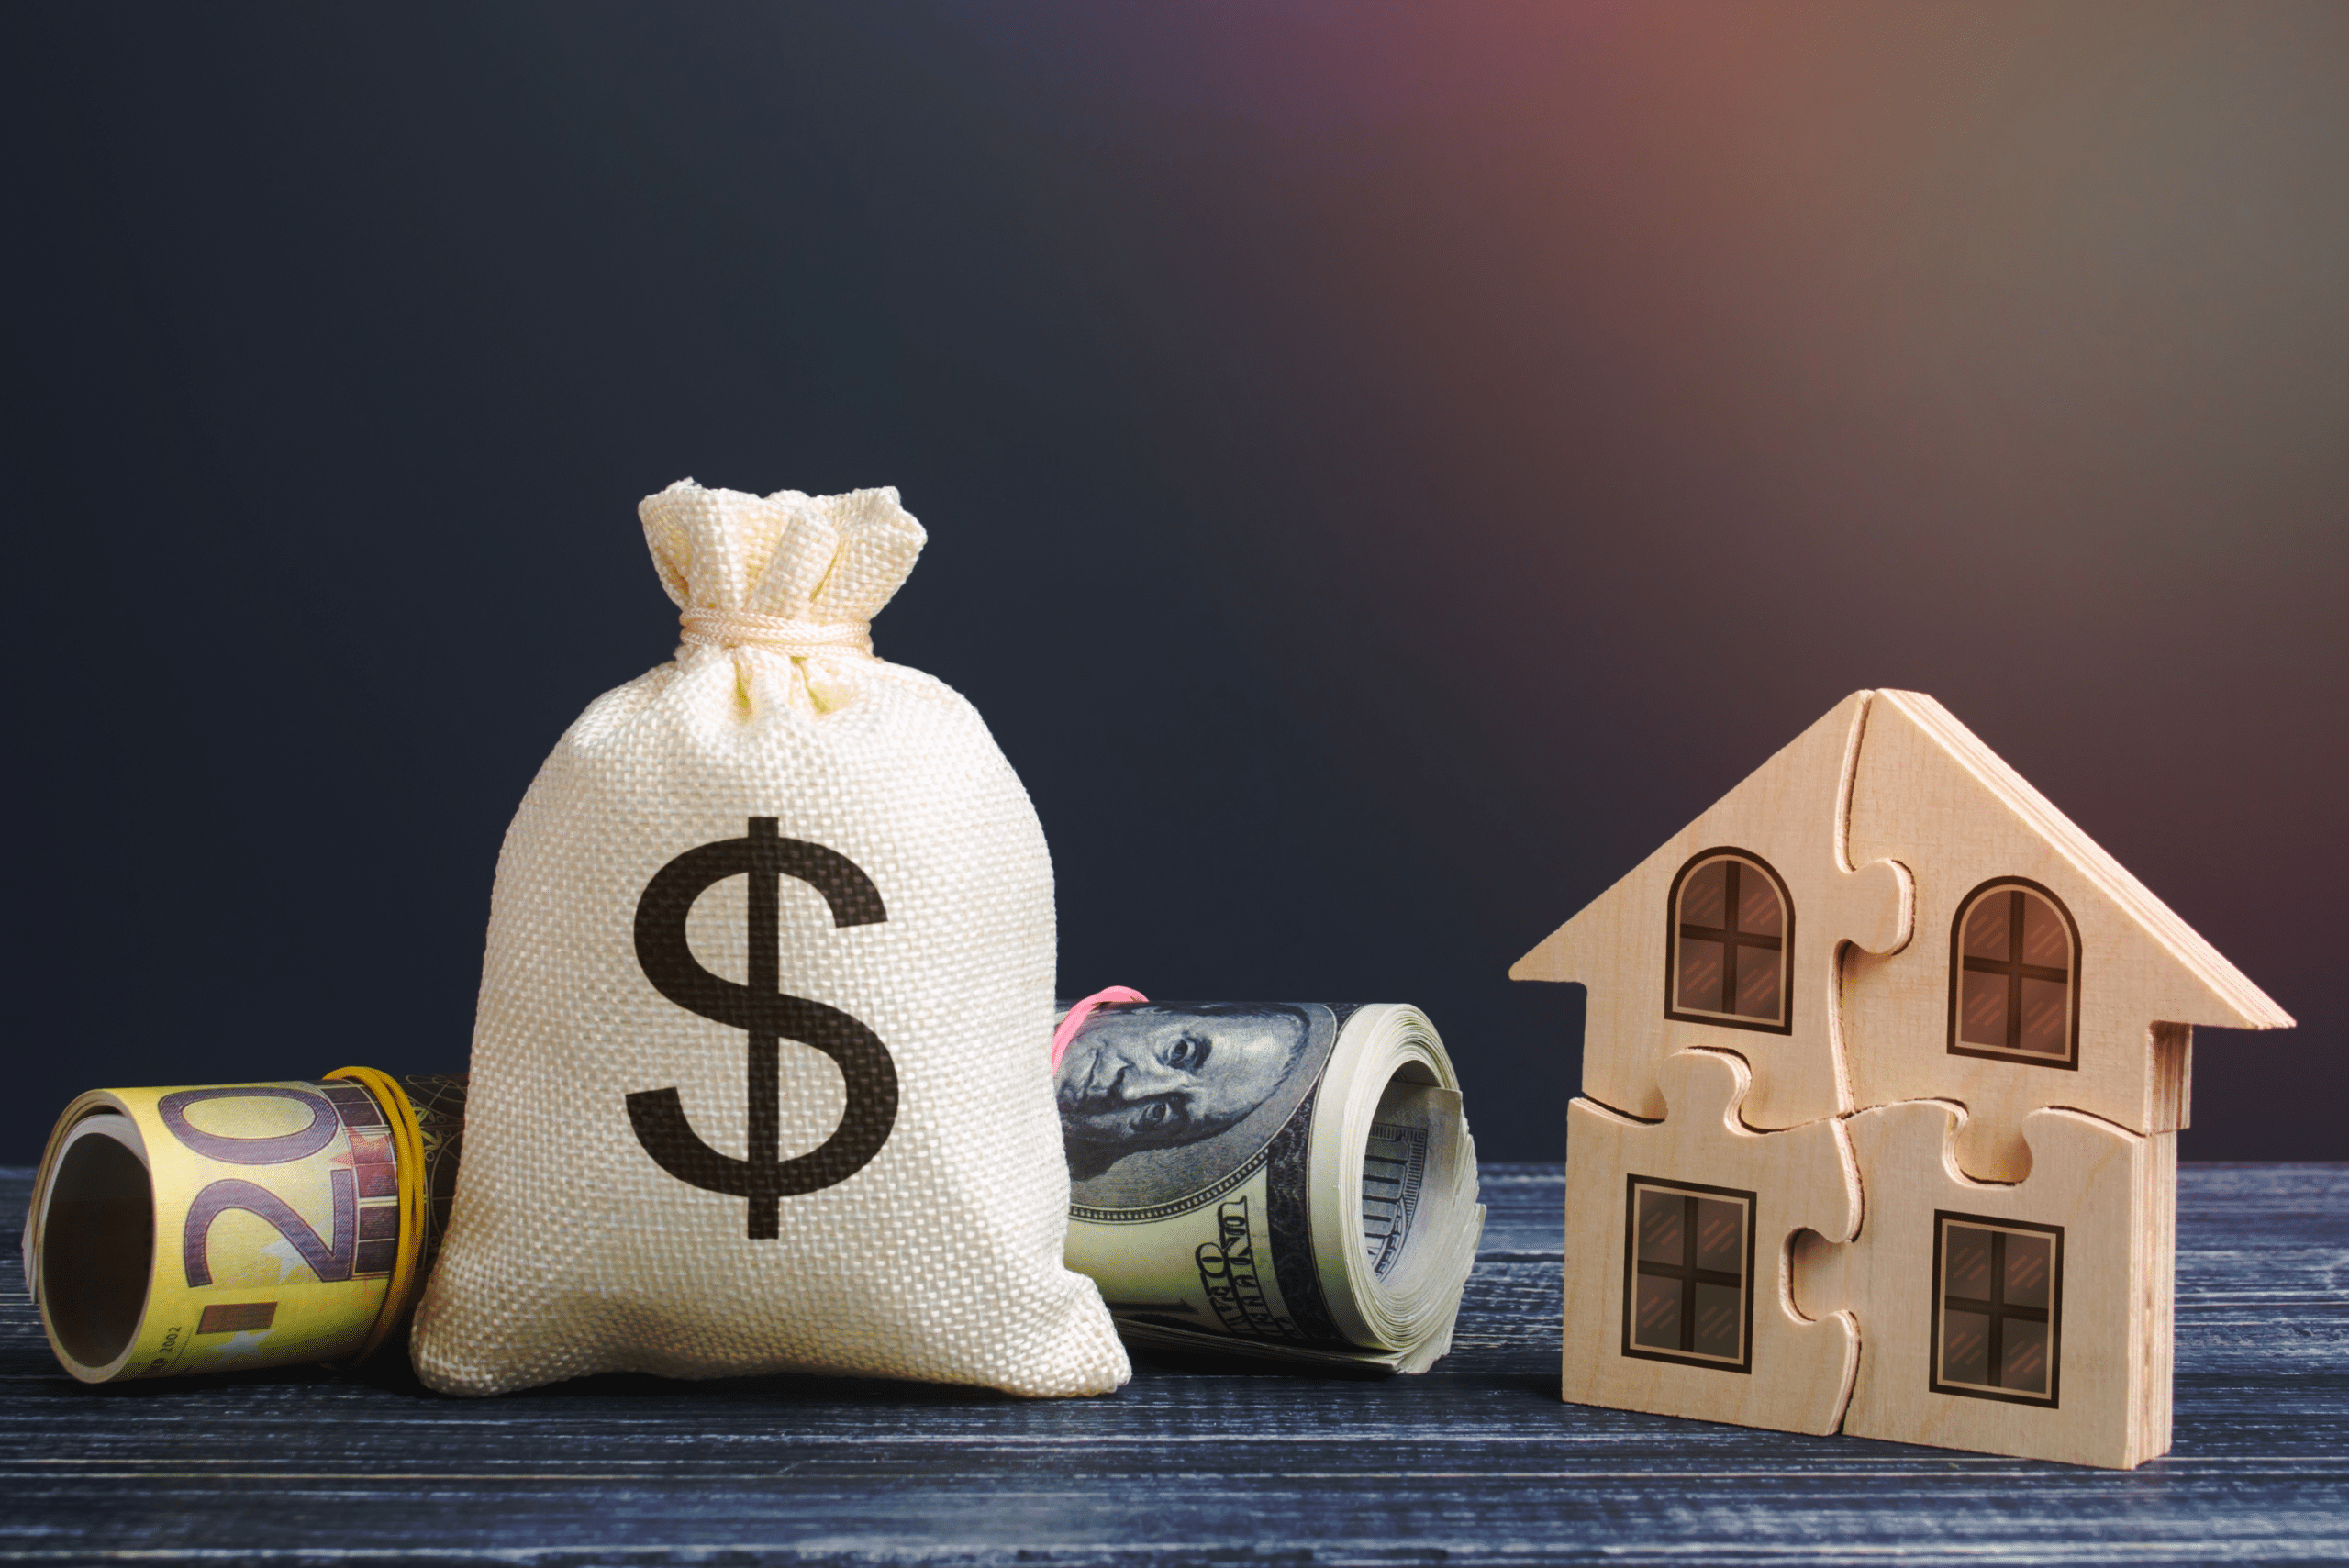 House-shaped puzzle near a stack with dollar sign and rolls of cash.